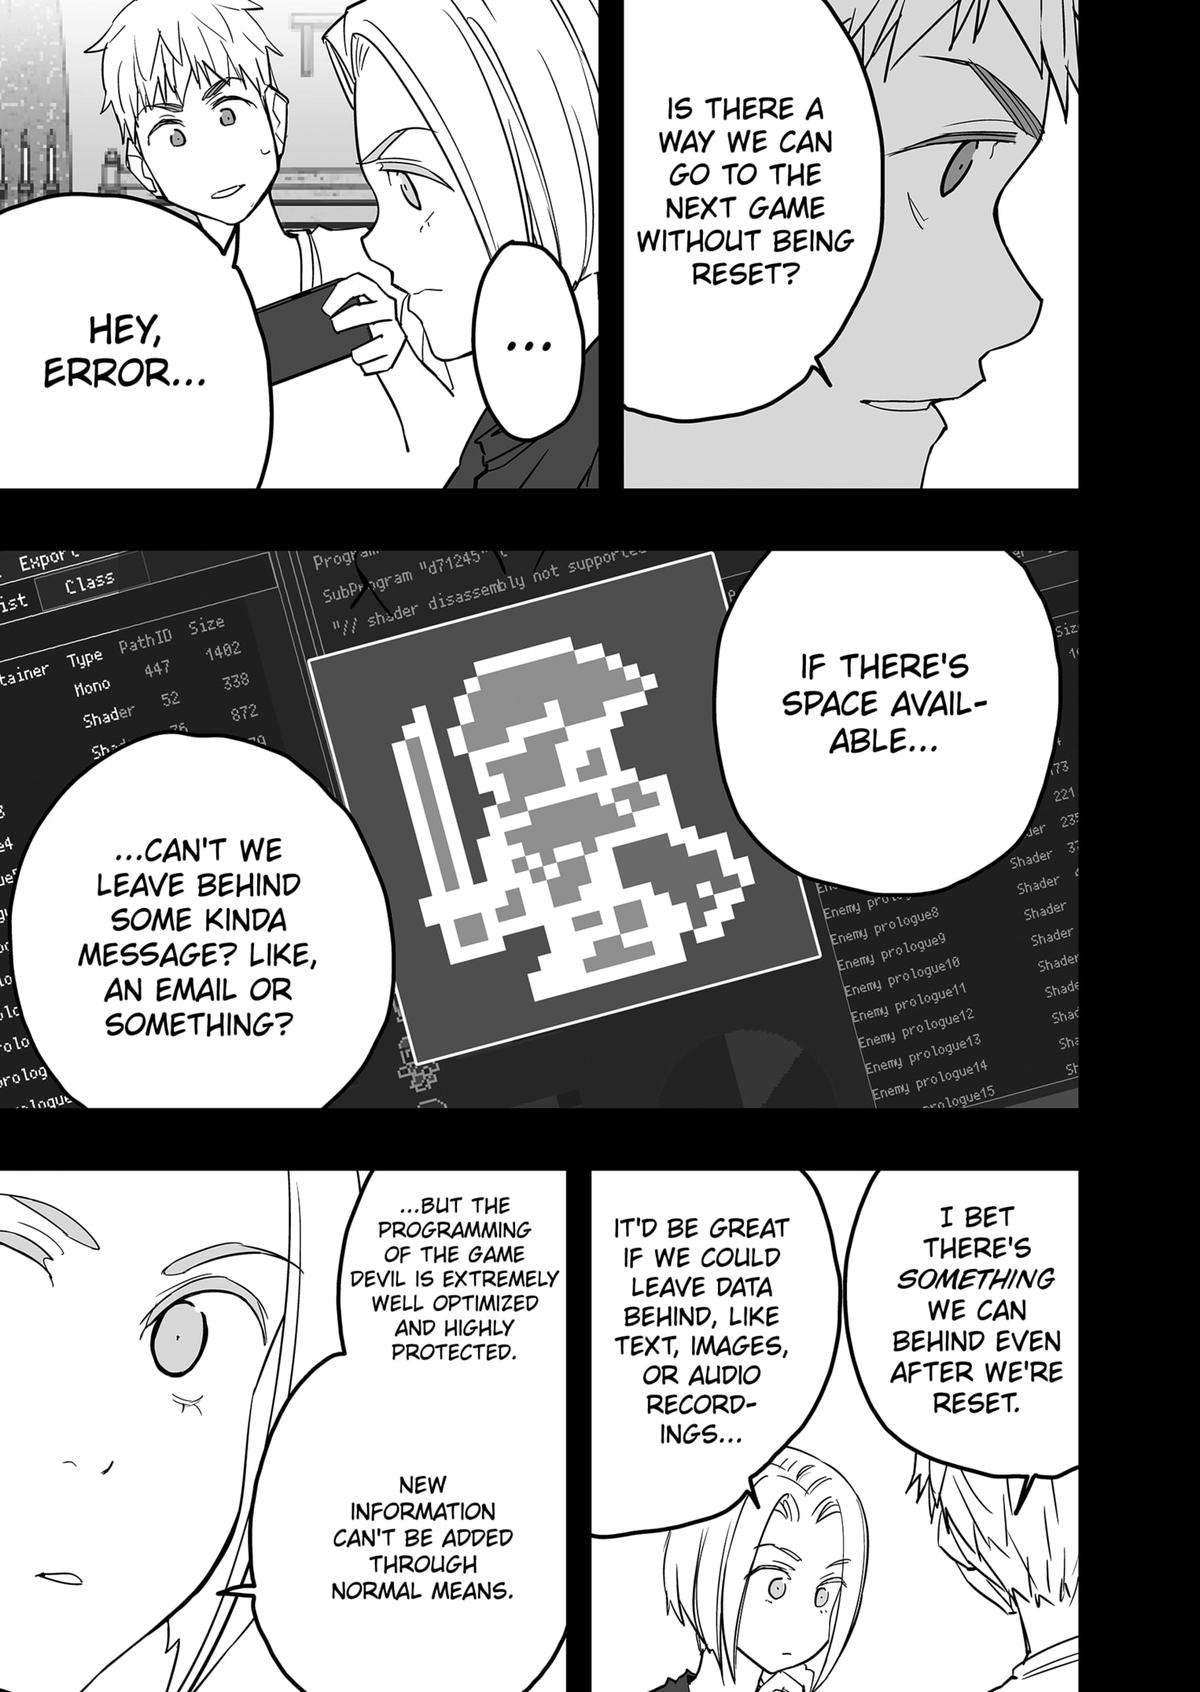 The Game Devil - chapter 25 - #3